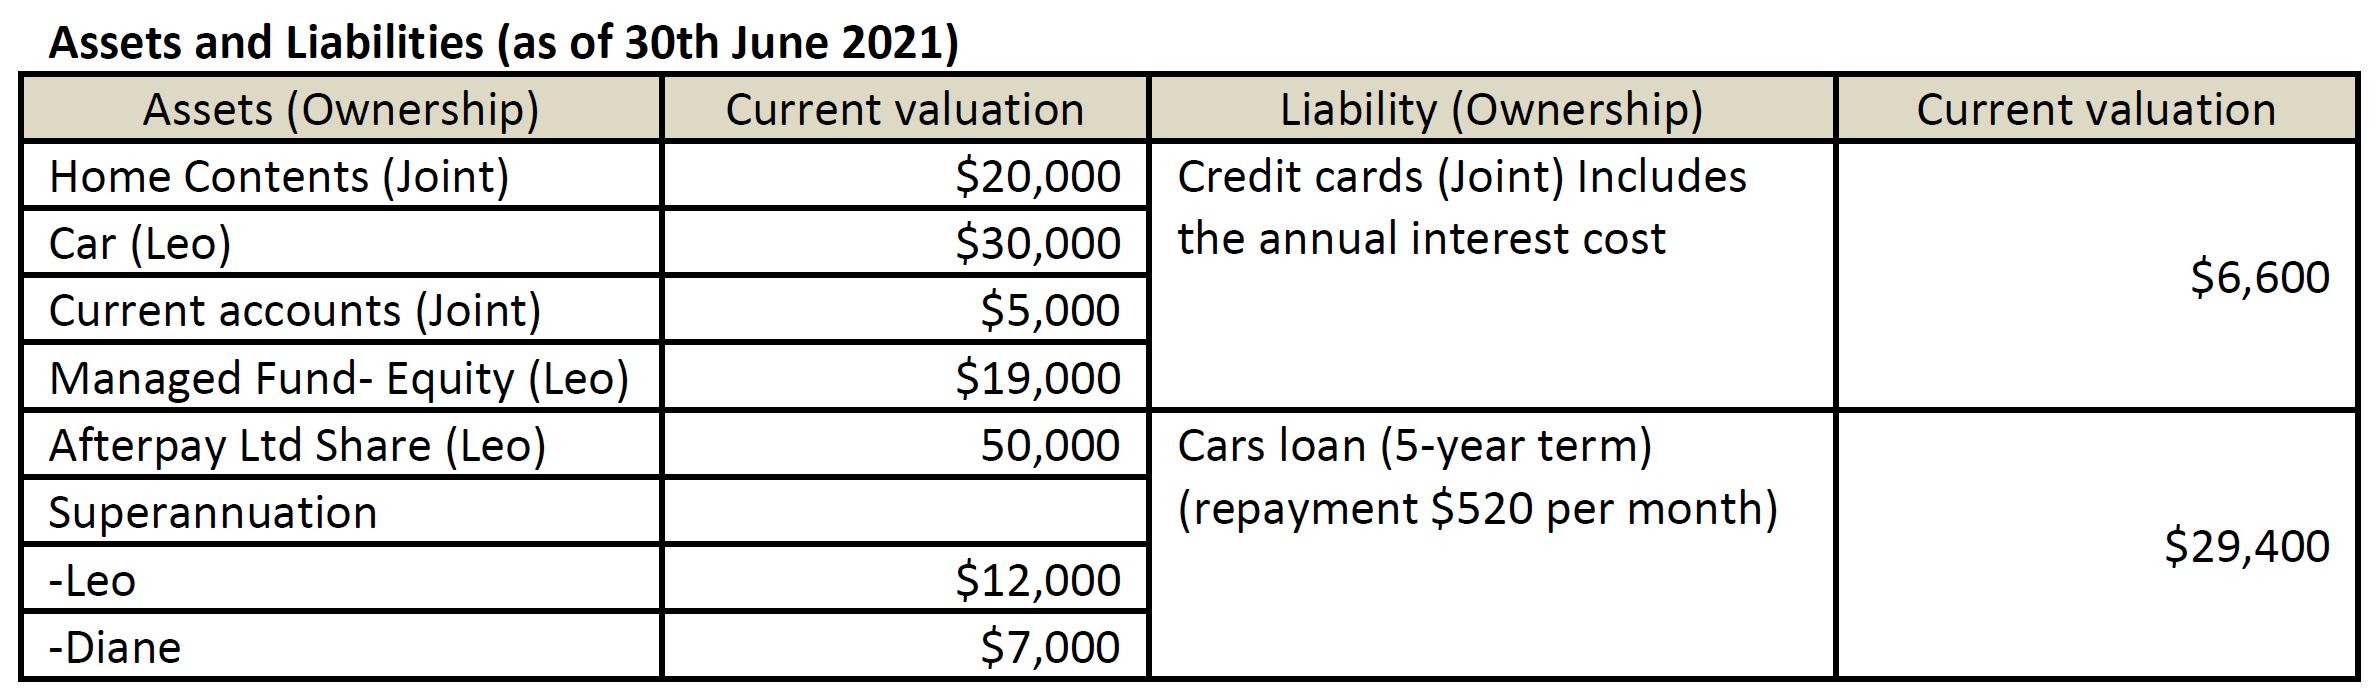 Current valuation $6,600 Assets and Liabilities (as of 30th June 2021) Assets (Ownership) Current valuation Liability (Owners